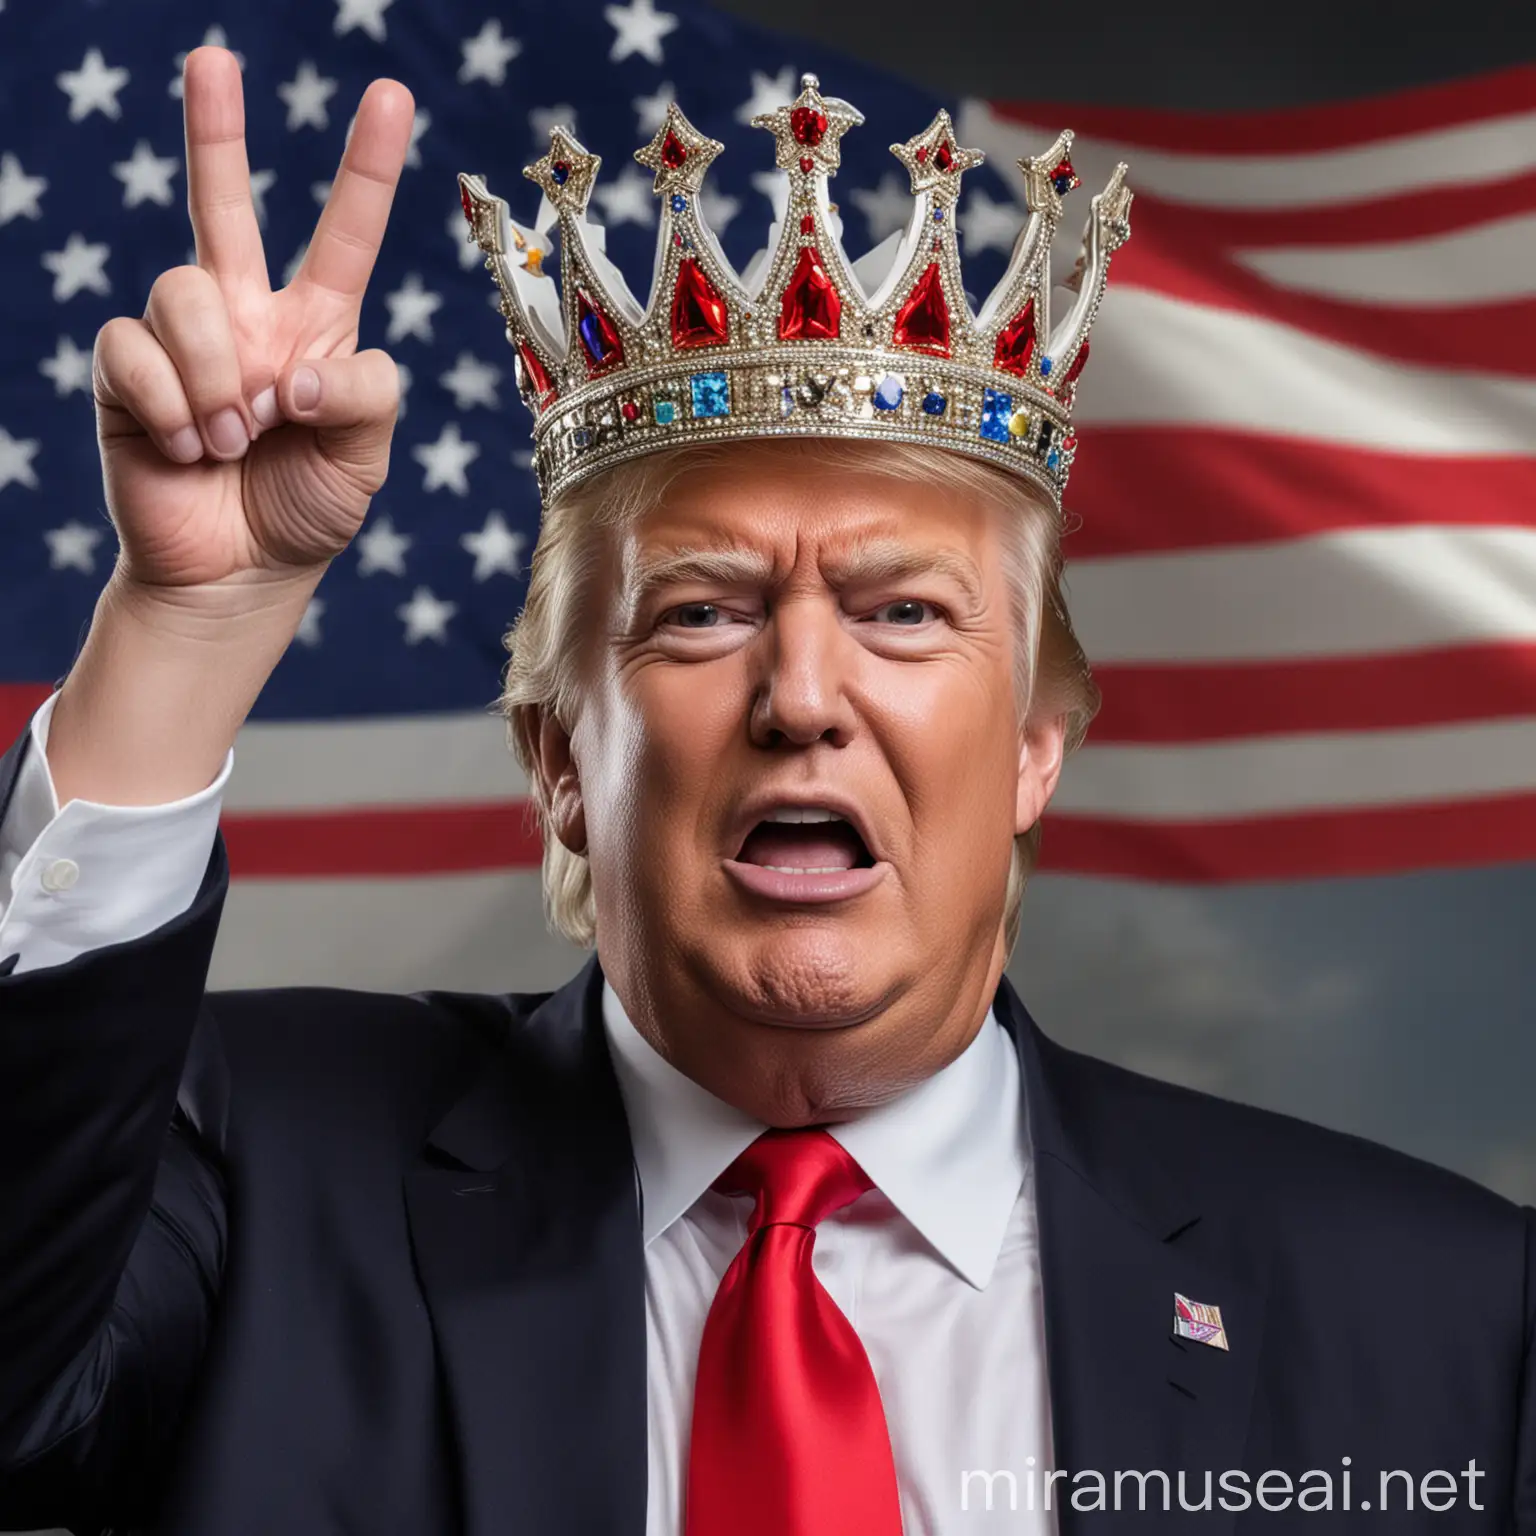 Donald Trump Triumphantly Displays Victory with Crown